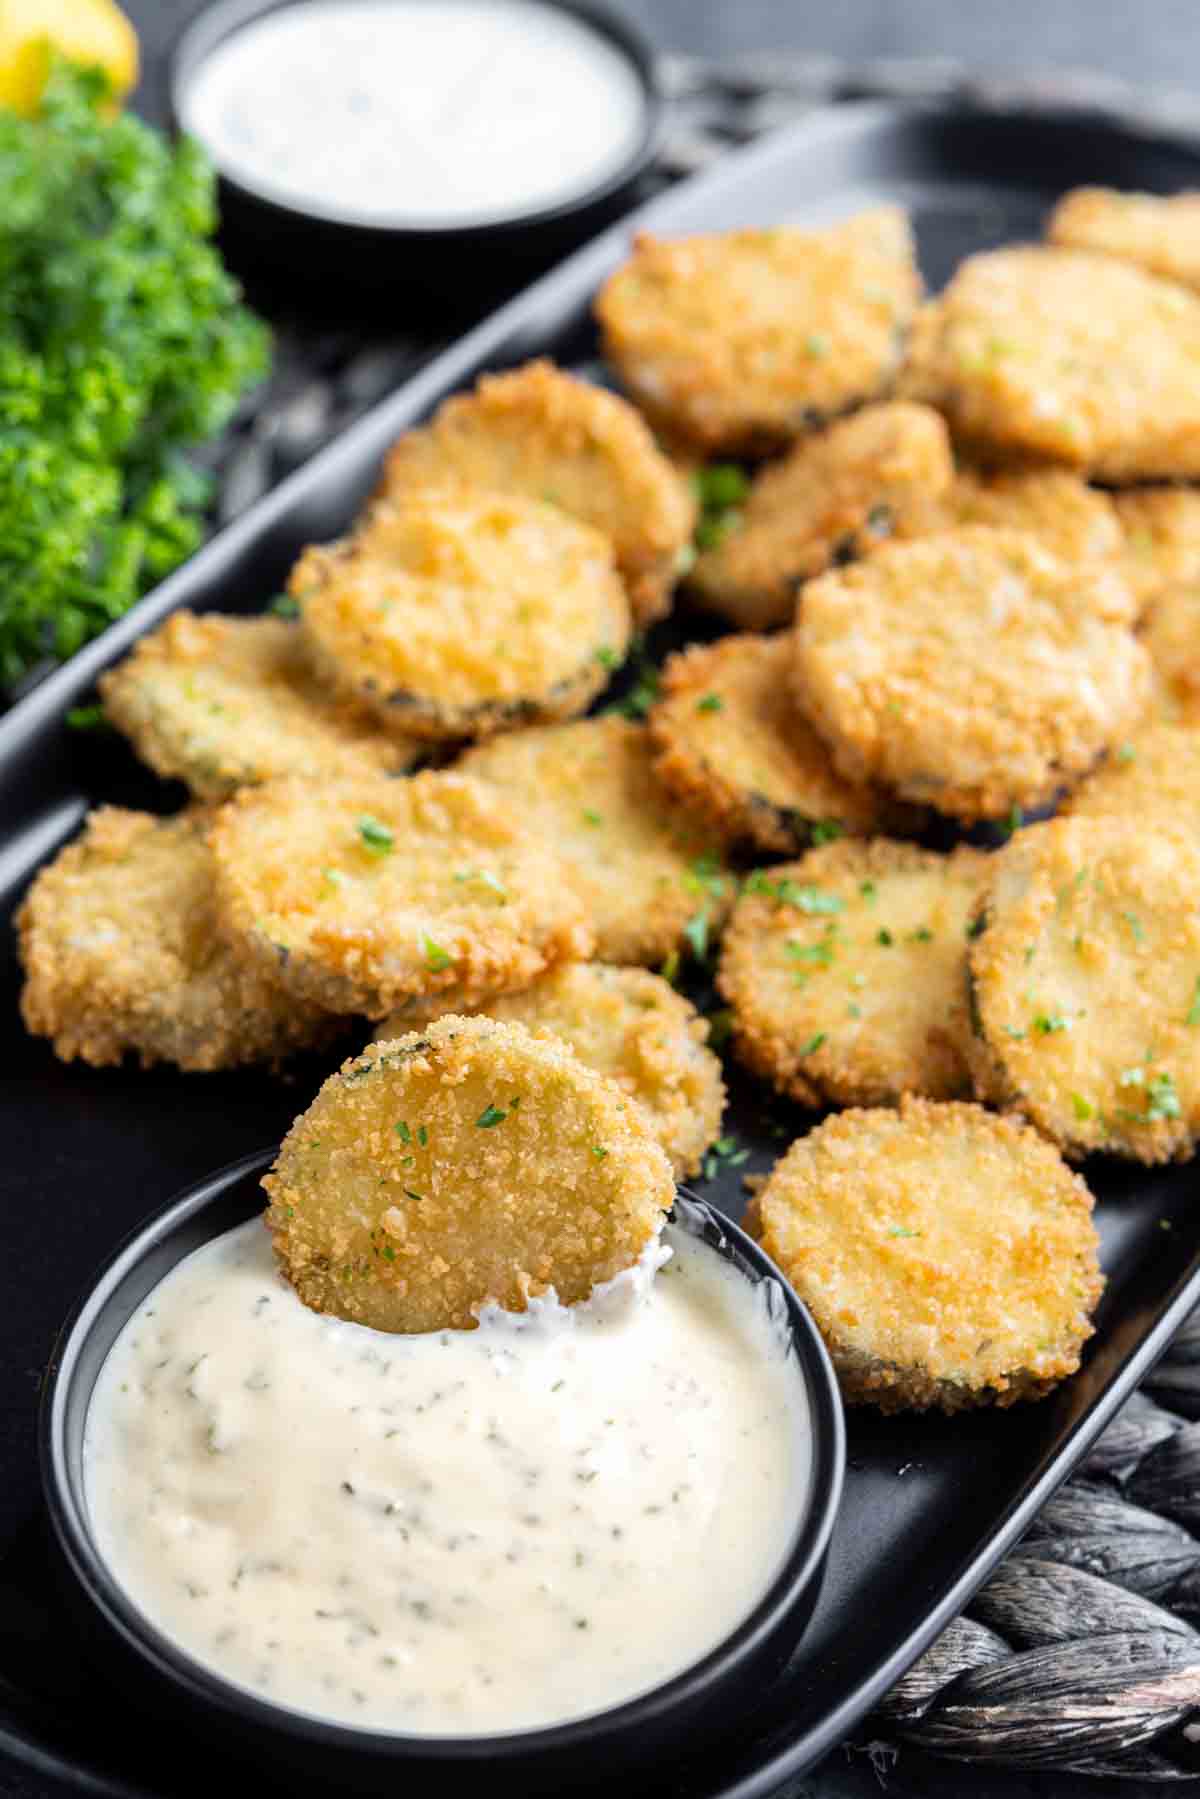 Fried zucchini with aioli sauce on a black plate.